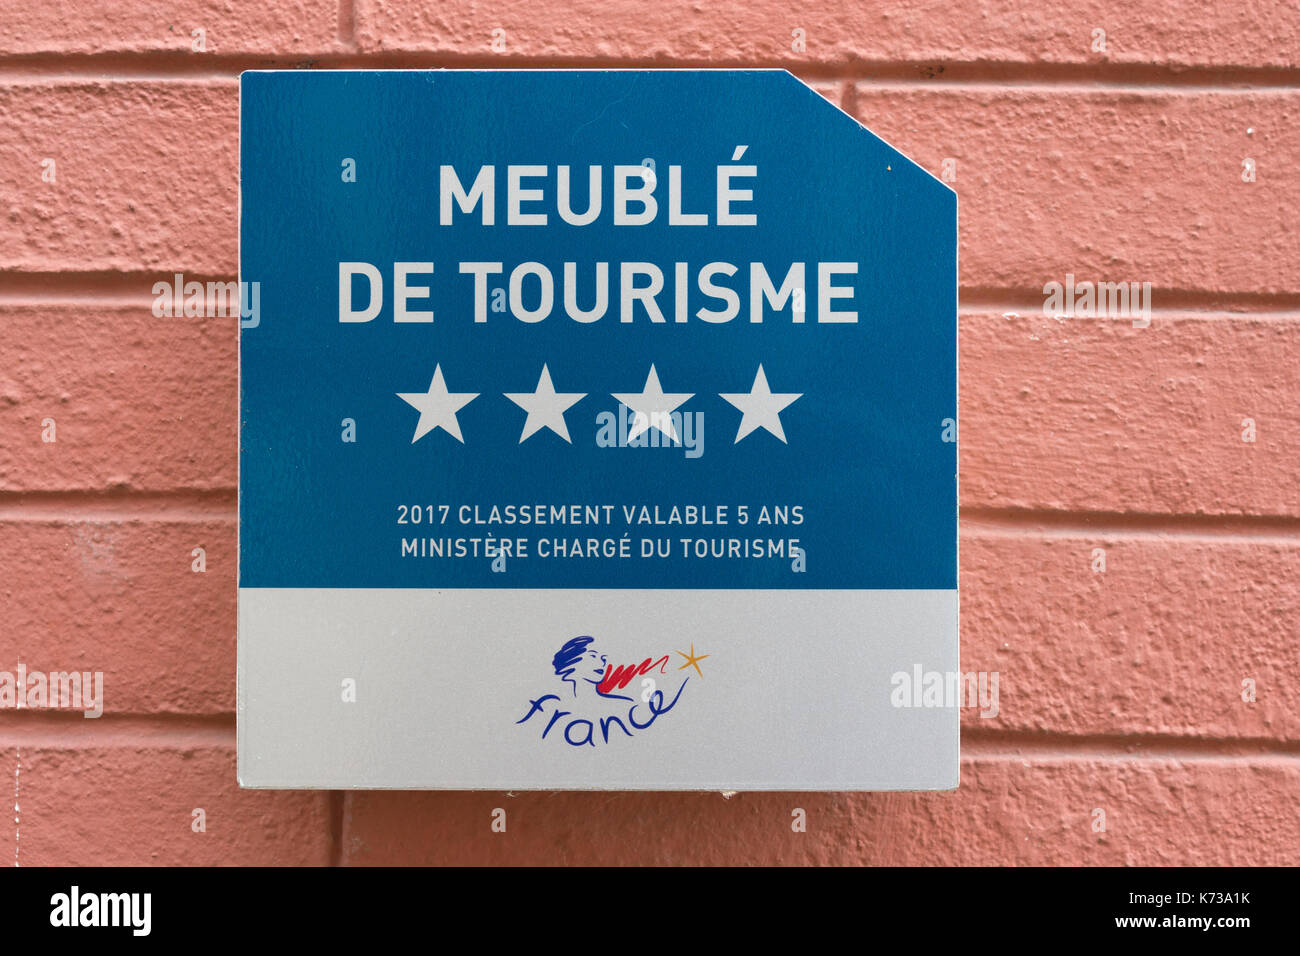 Rentable furnished holiday apartment recognised by tourism ministry, - sign in France Stock Photo